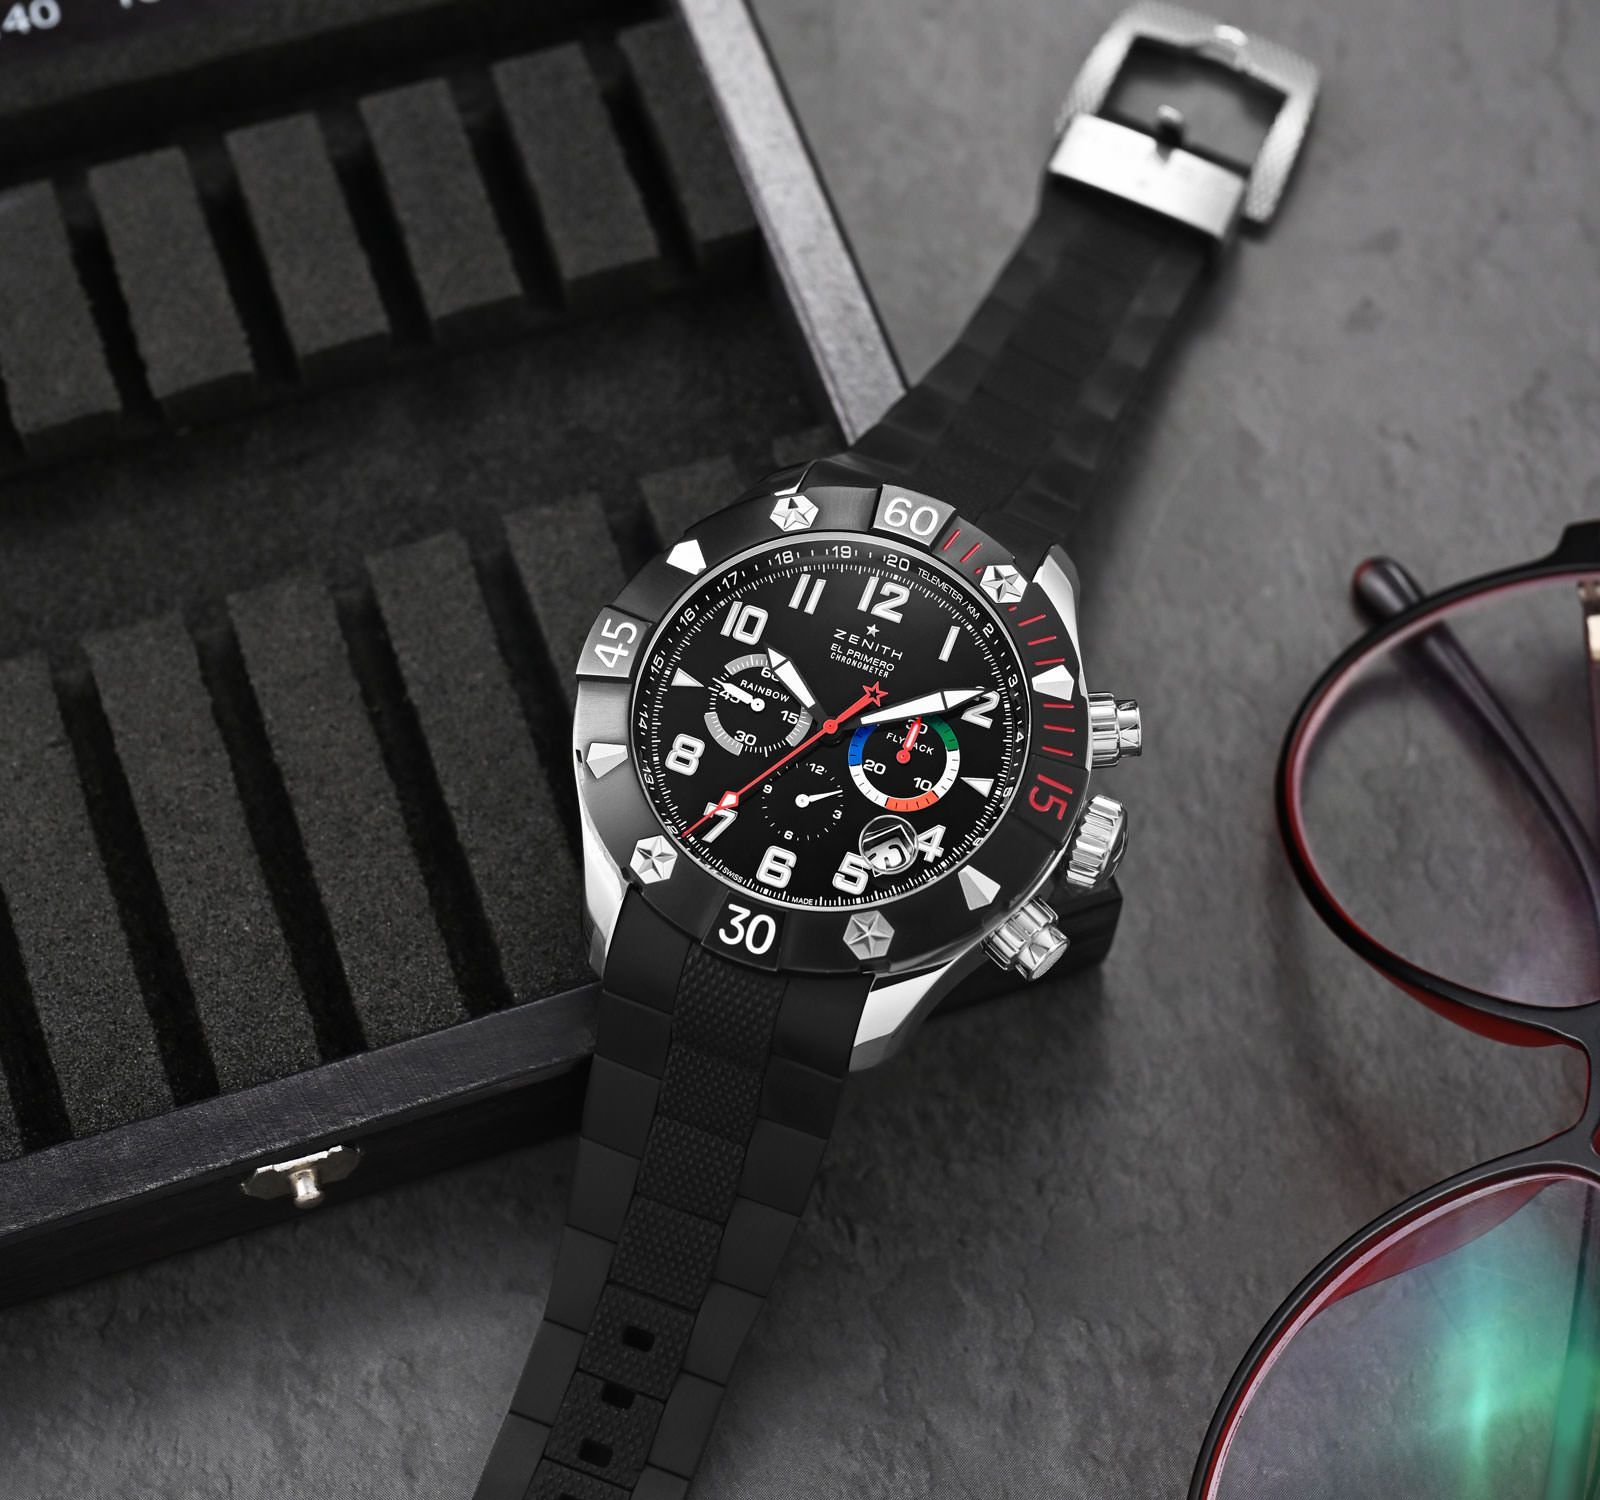 Zenith Defy Classic Rainbow – The Watch Pages